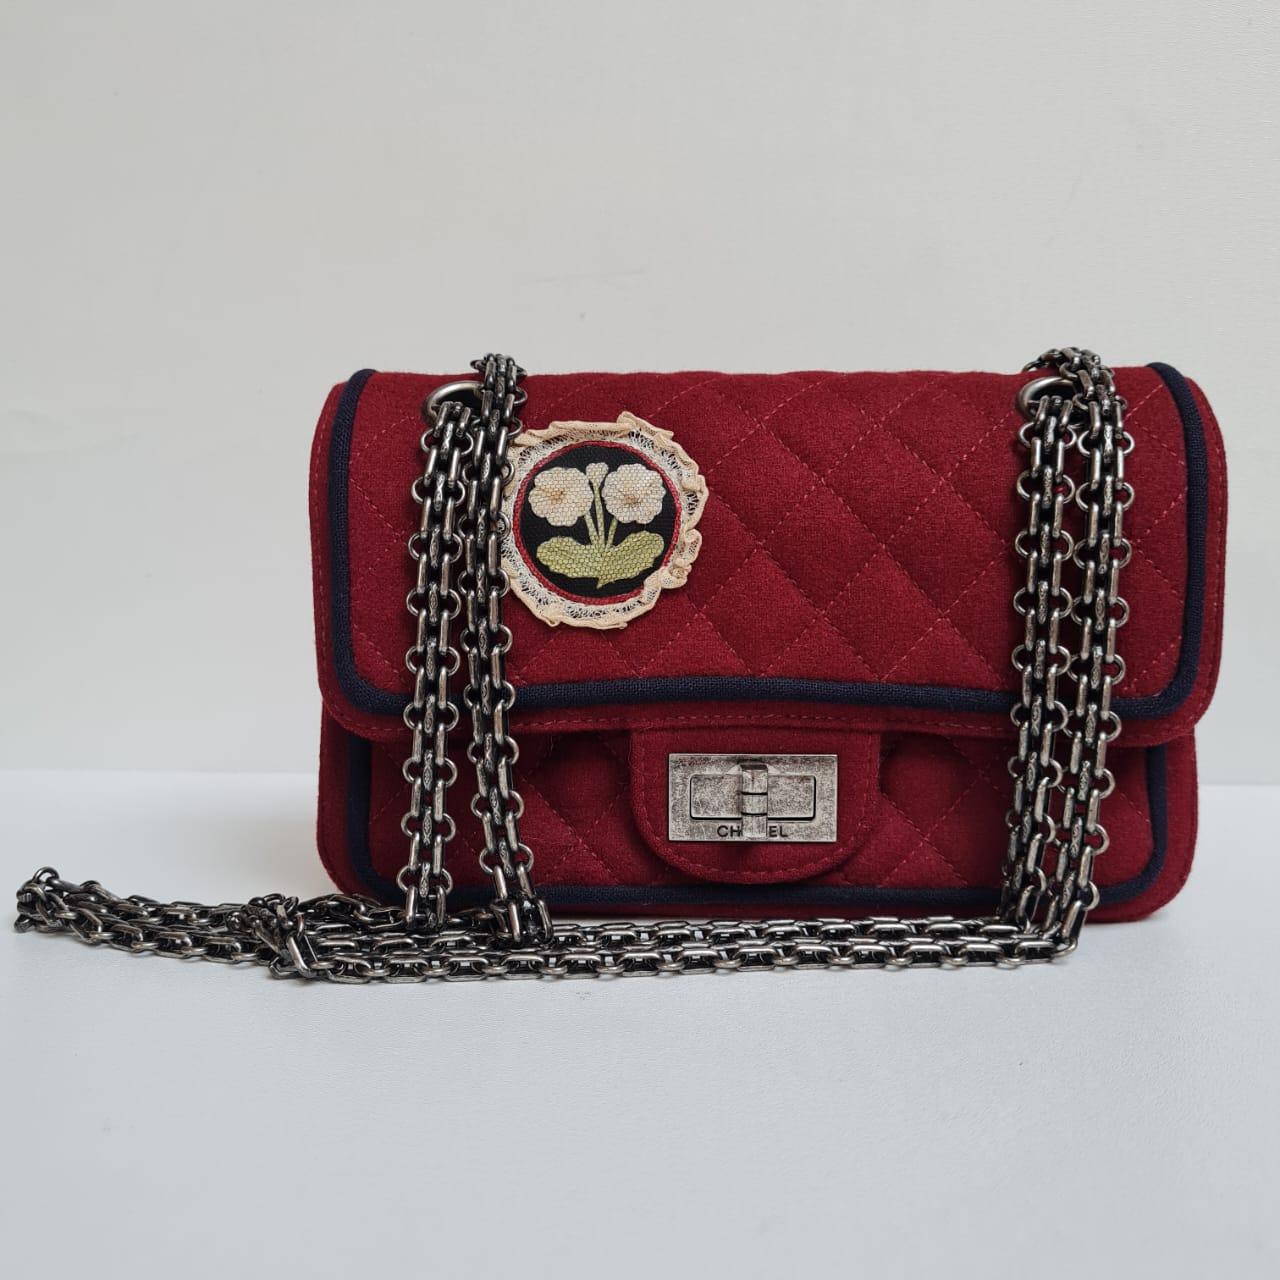 Chanel 2015 Red Edelweiss Reissue Wool Flap Bag For Sale 3